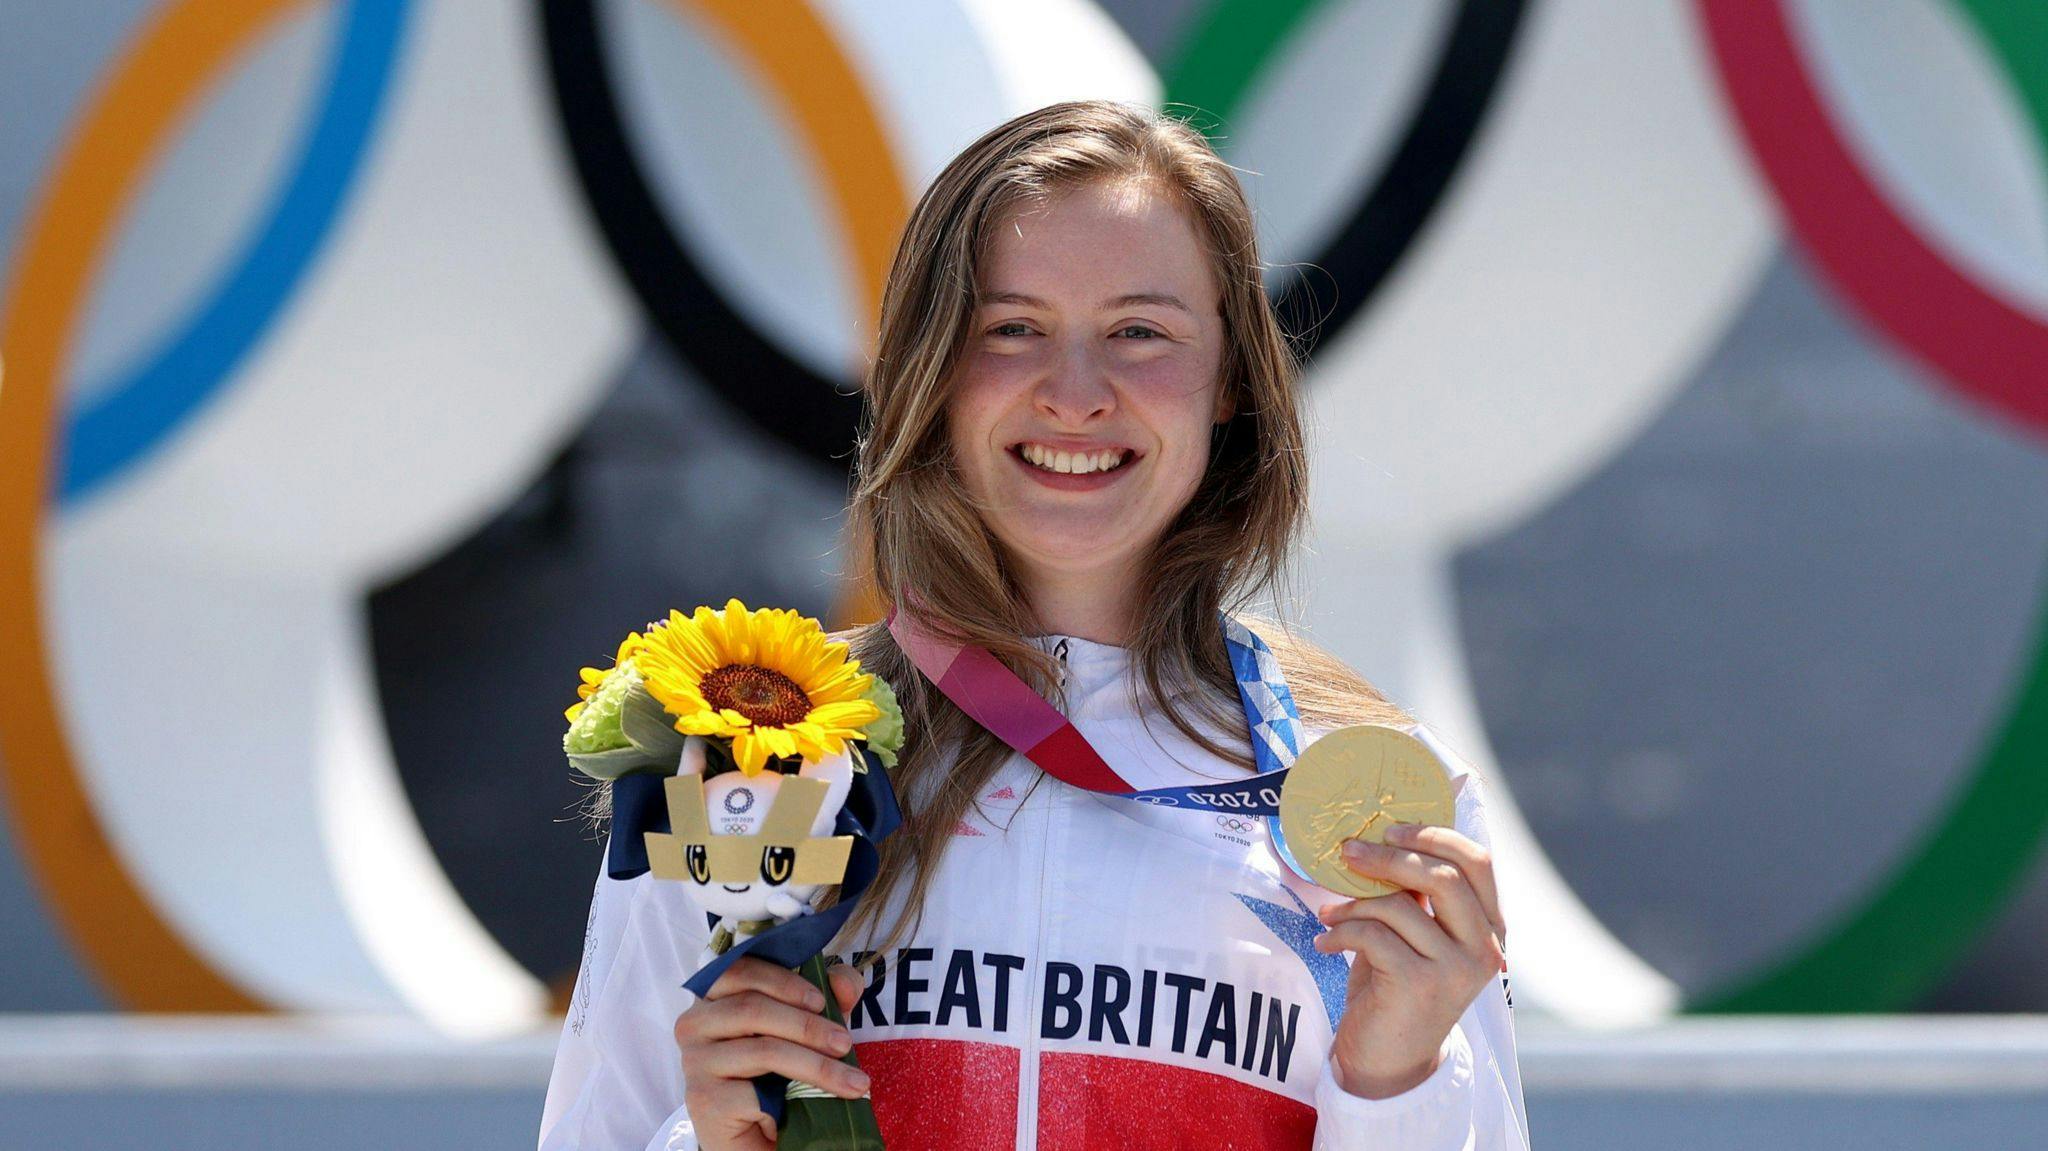 Charlotte Worthington discusses mental impact of Olympic gold